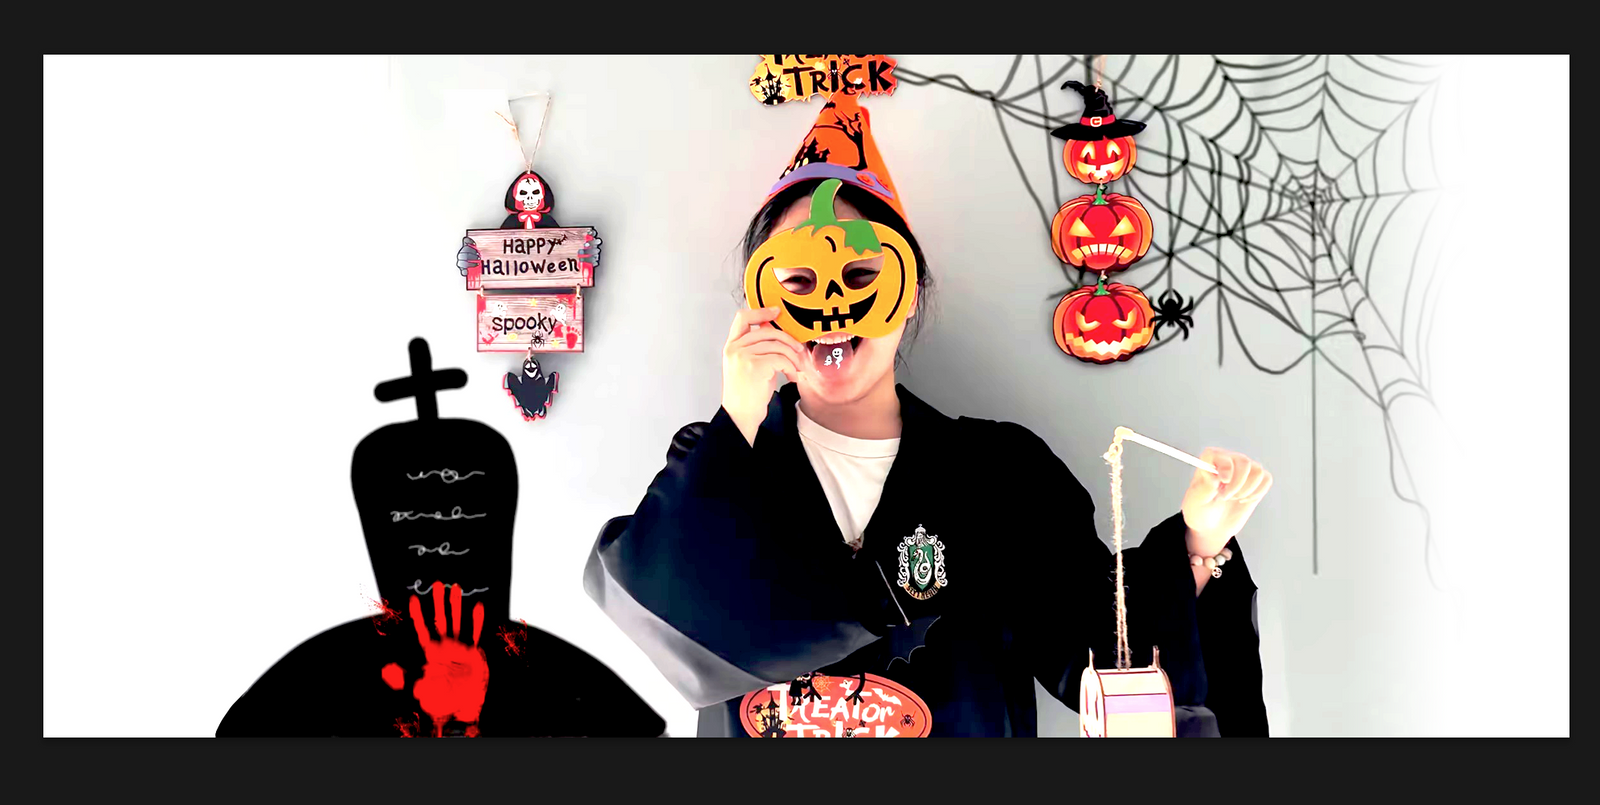 Laser engraving machine makes Halloween decorations to make you stand out in line